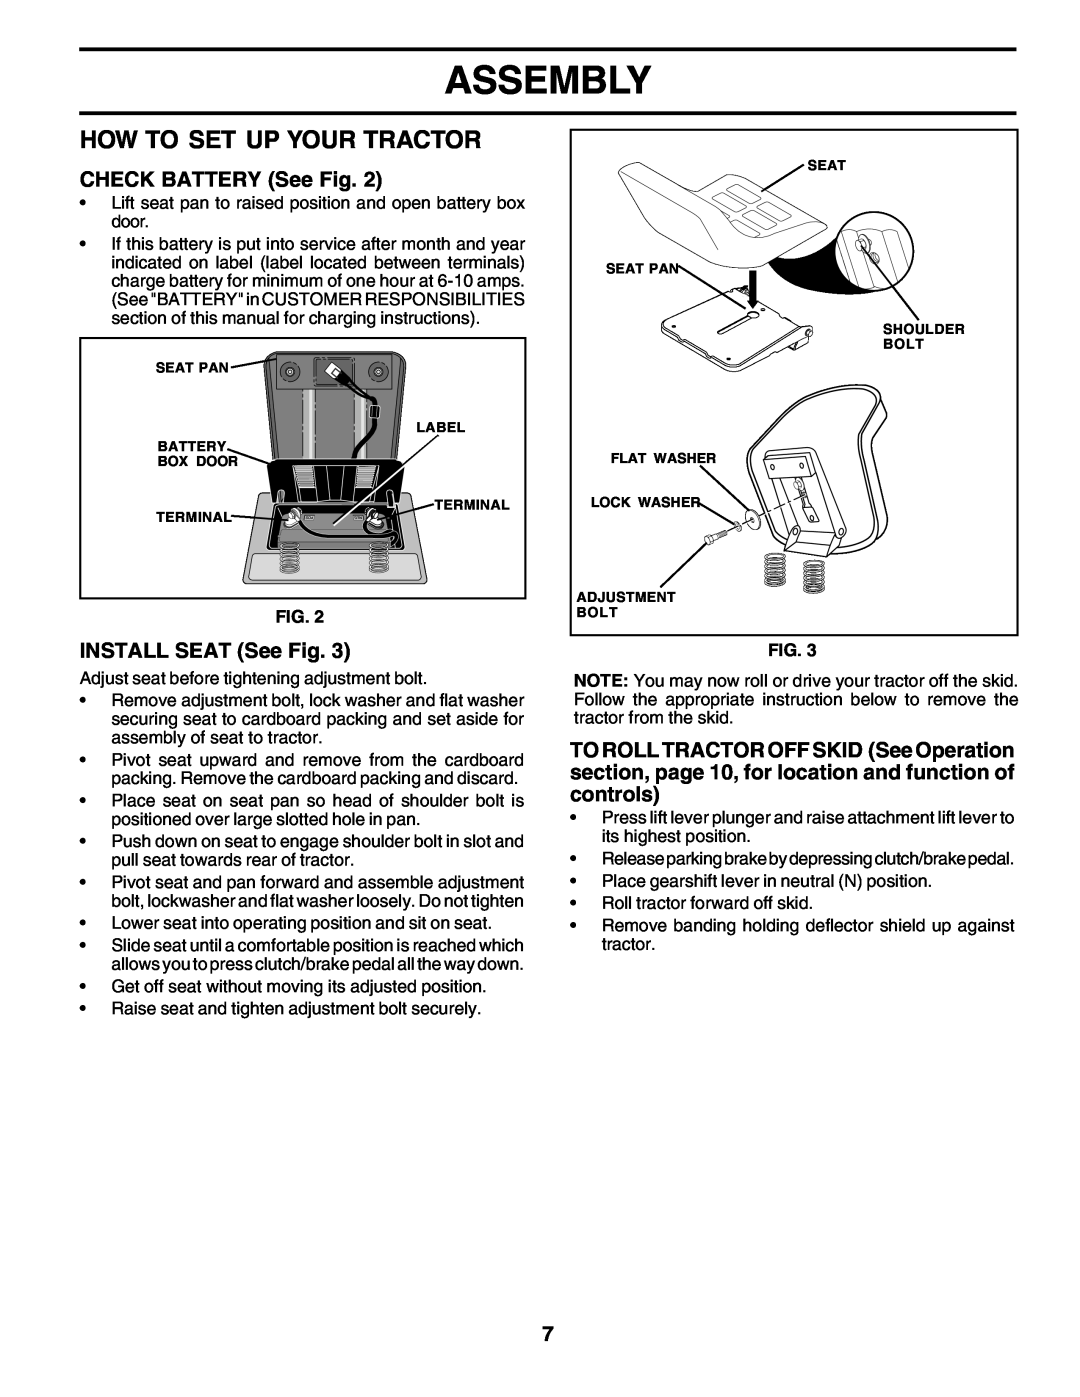 Poulan PC14542D owner manual How To Set Up Your Tractor, Assembly, CHECK BATTERY See Fig, INSTALL SEAT See Fig 